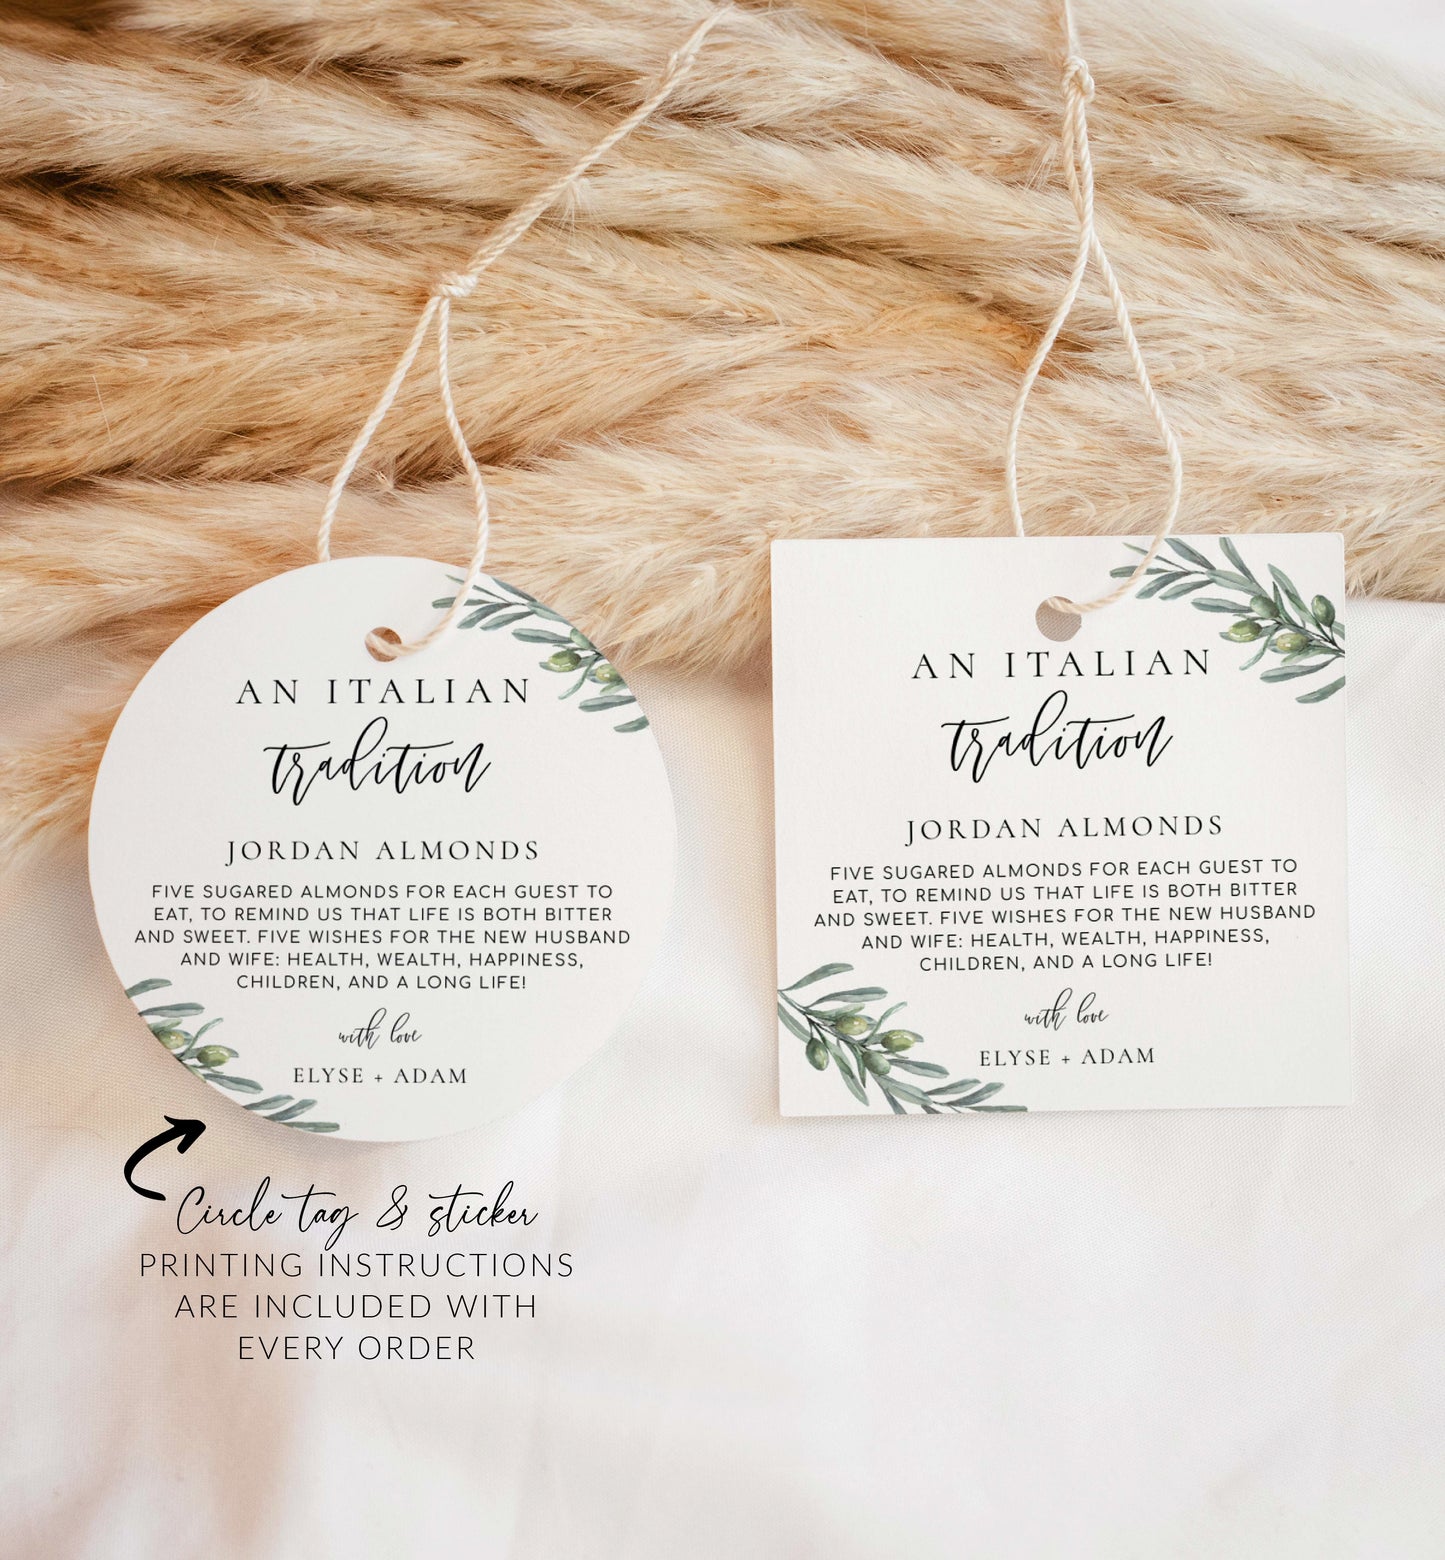 An Italian Tradition Favor Tag, Printable Jordan Almonds Tag, Olive Leaves Sugared Almonds Wedding Favor Tag, Wedding Favor Tag, Olive Grove